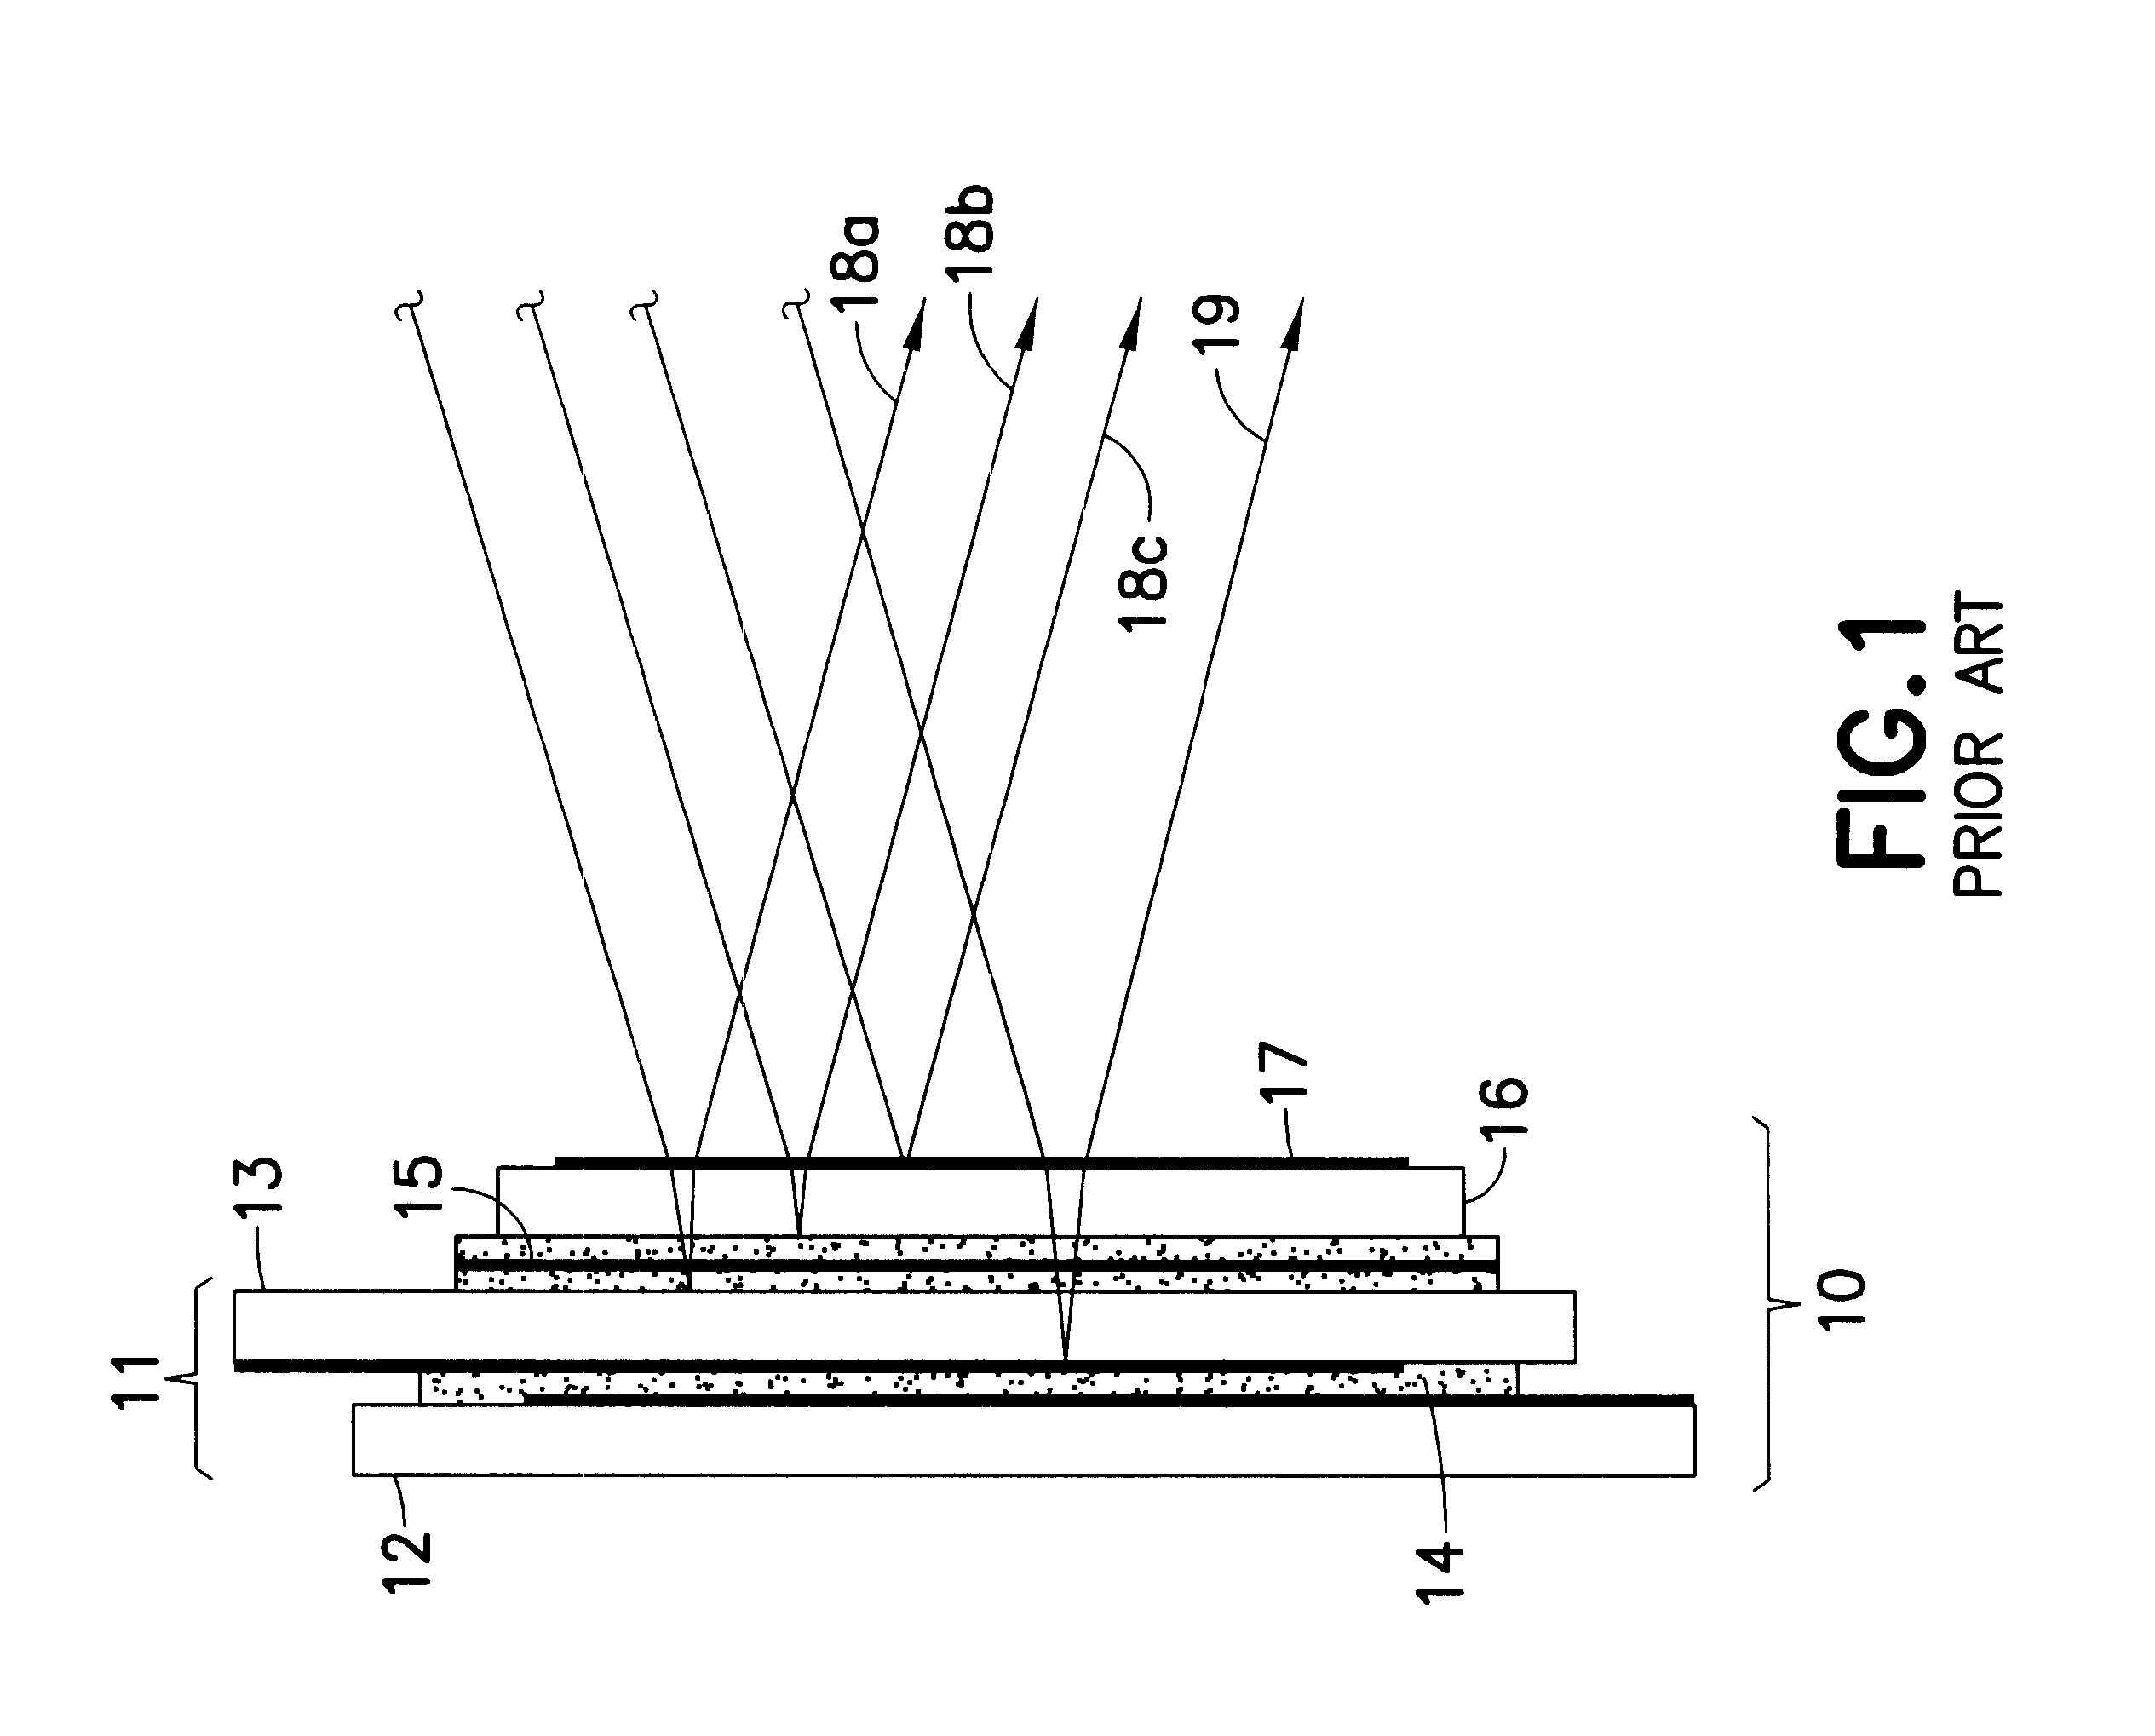 Liquid crystal cell for use in coherent beams